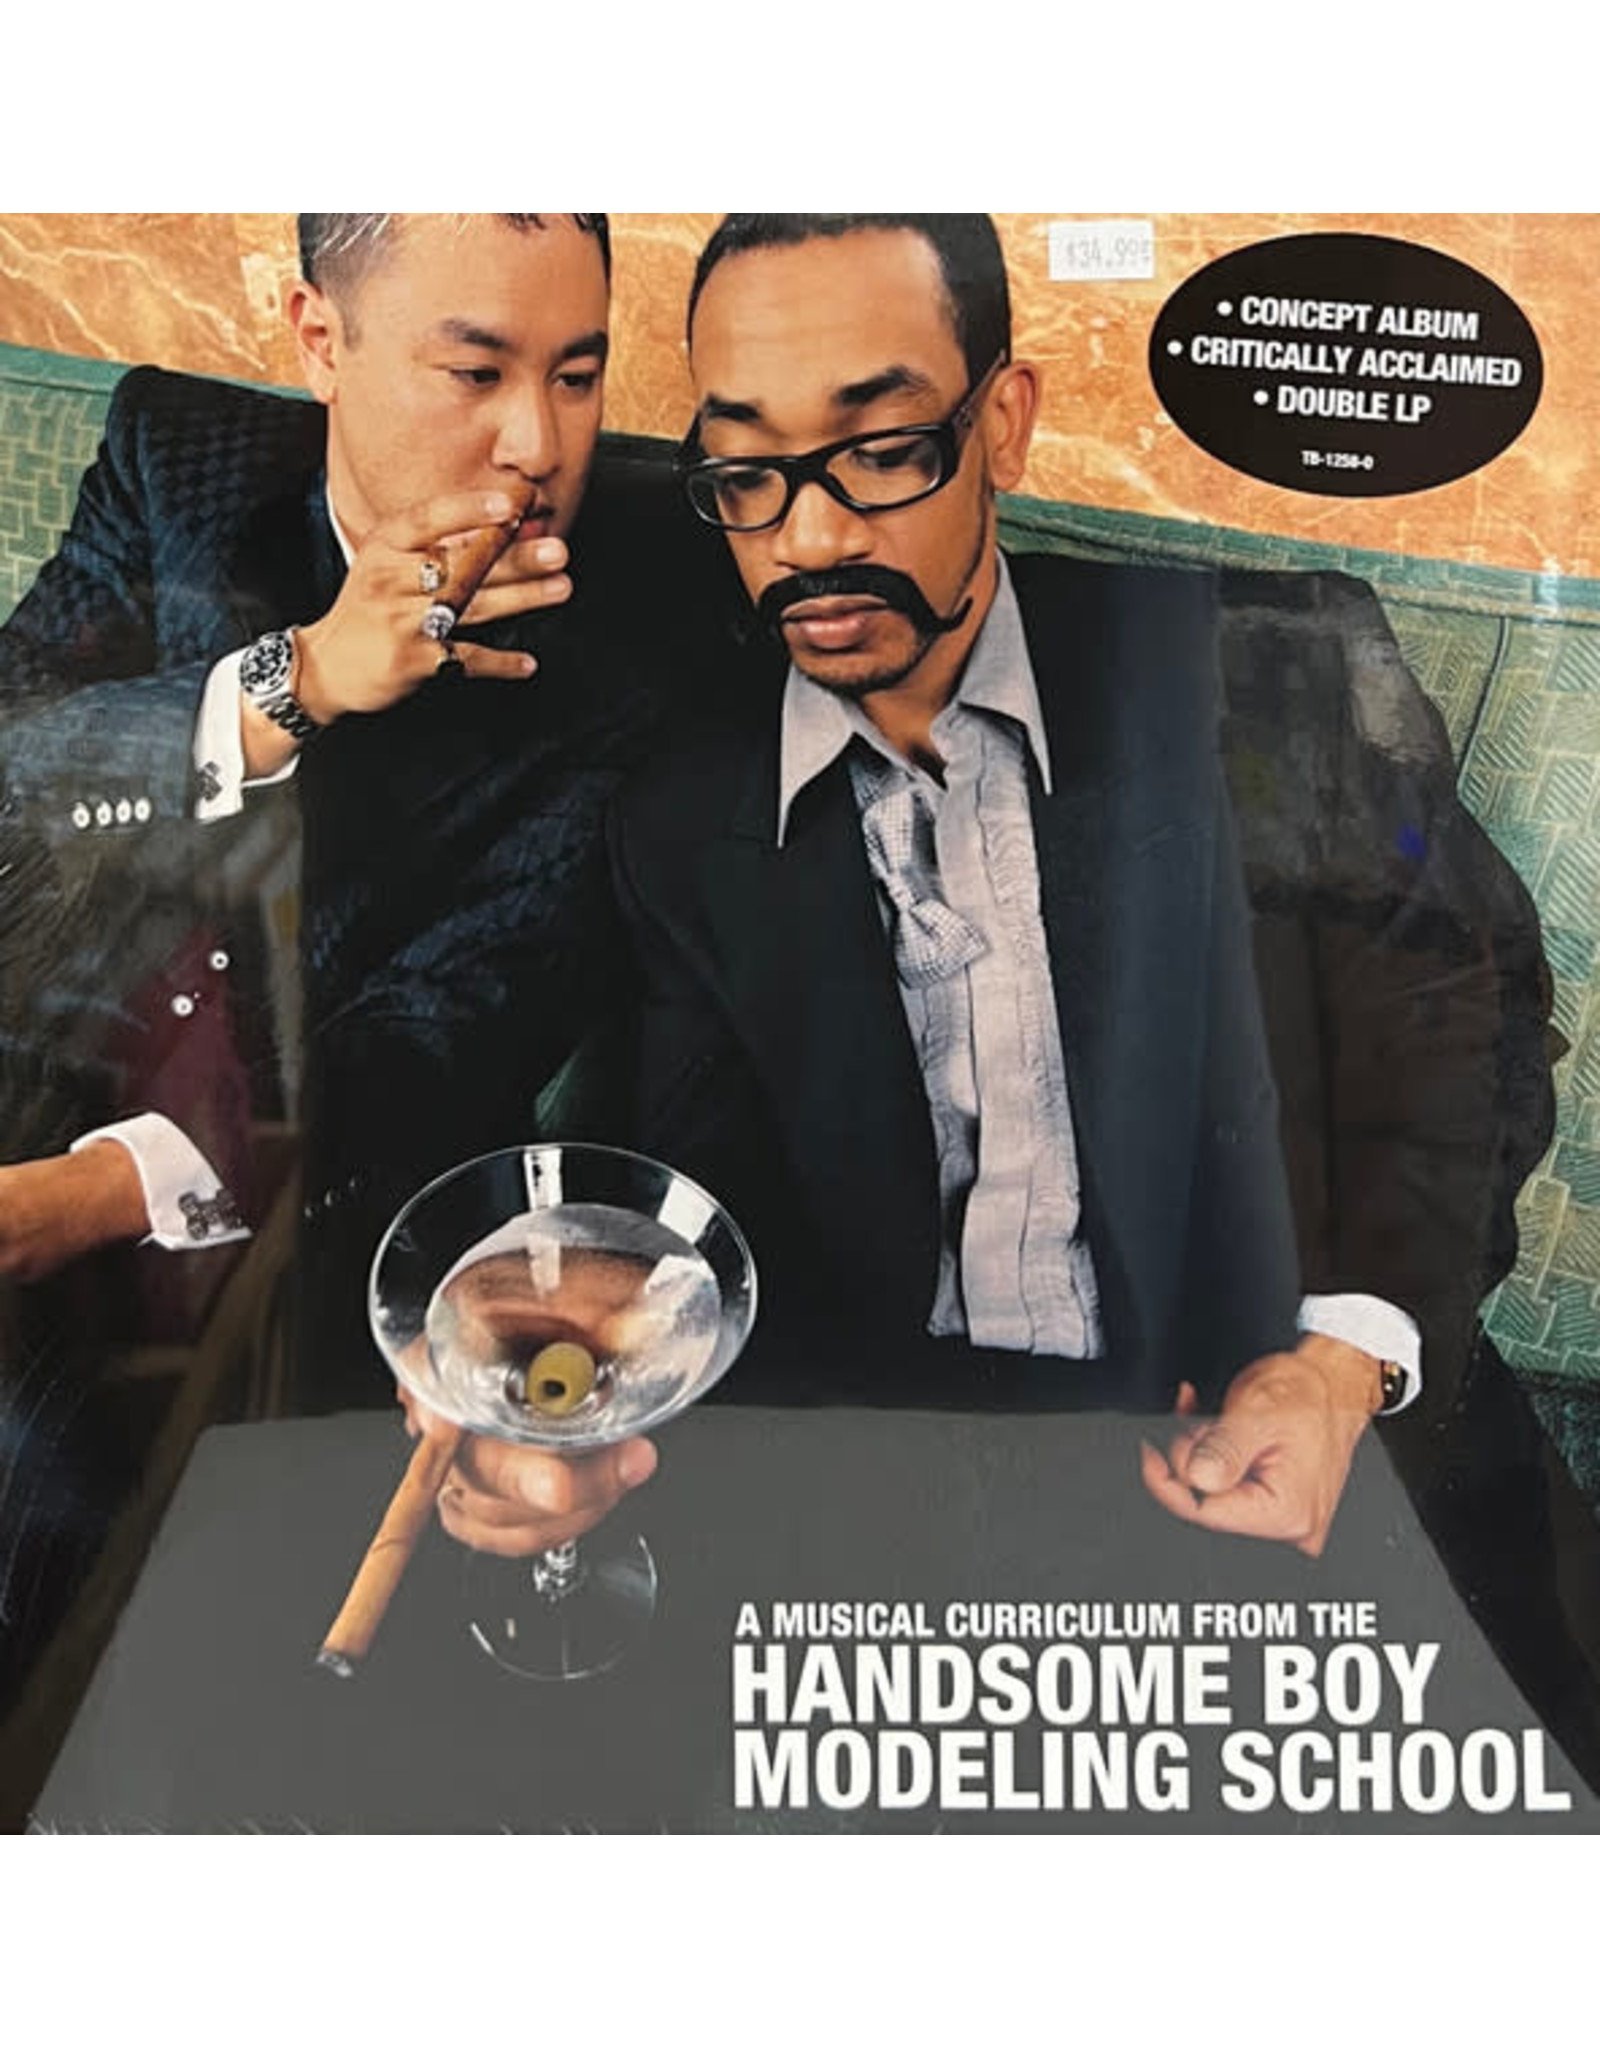 Handsome Boy Modeling School / So... How's Your Girl? [Record Store Day 2022]